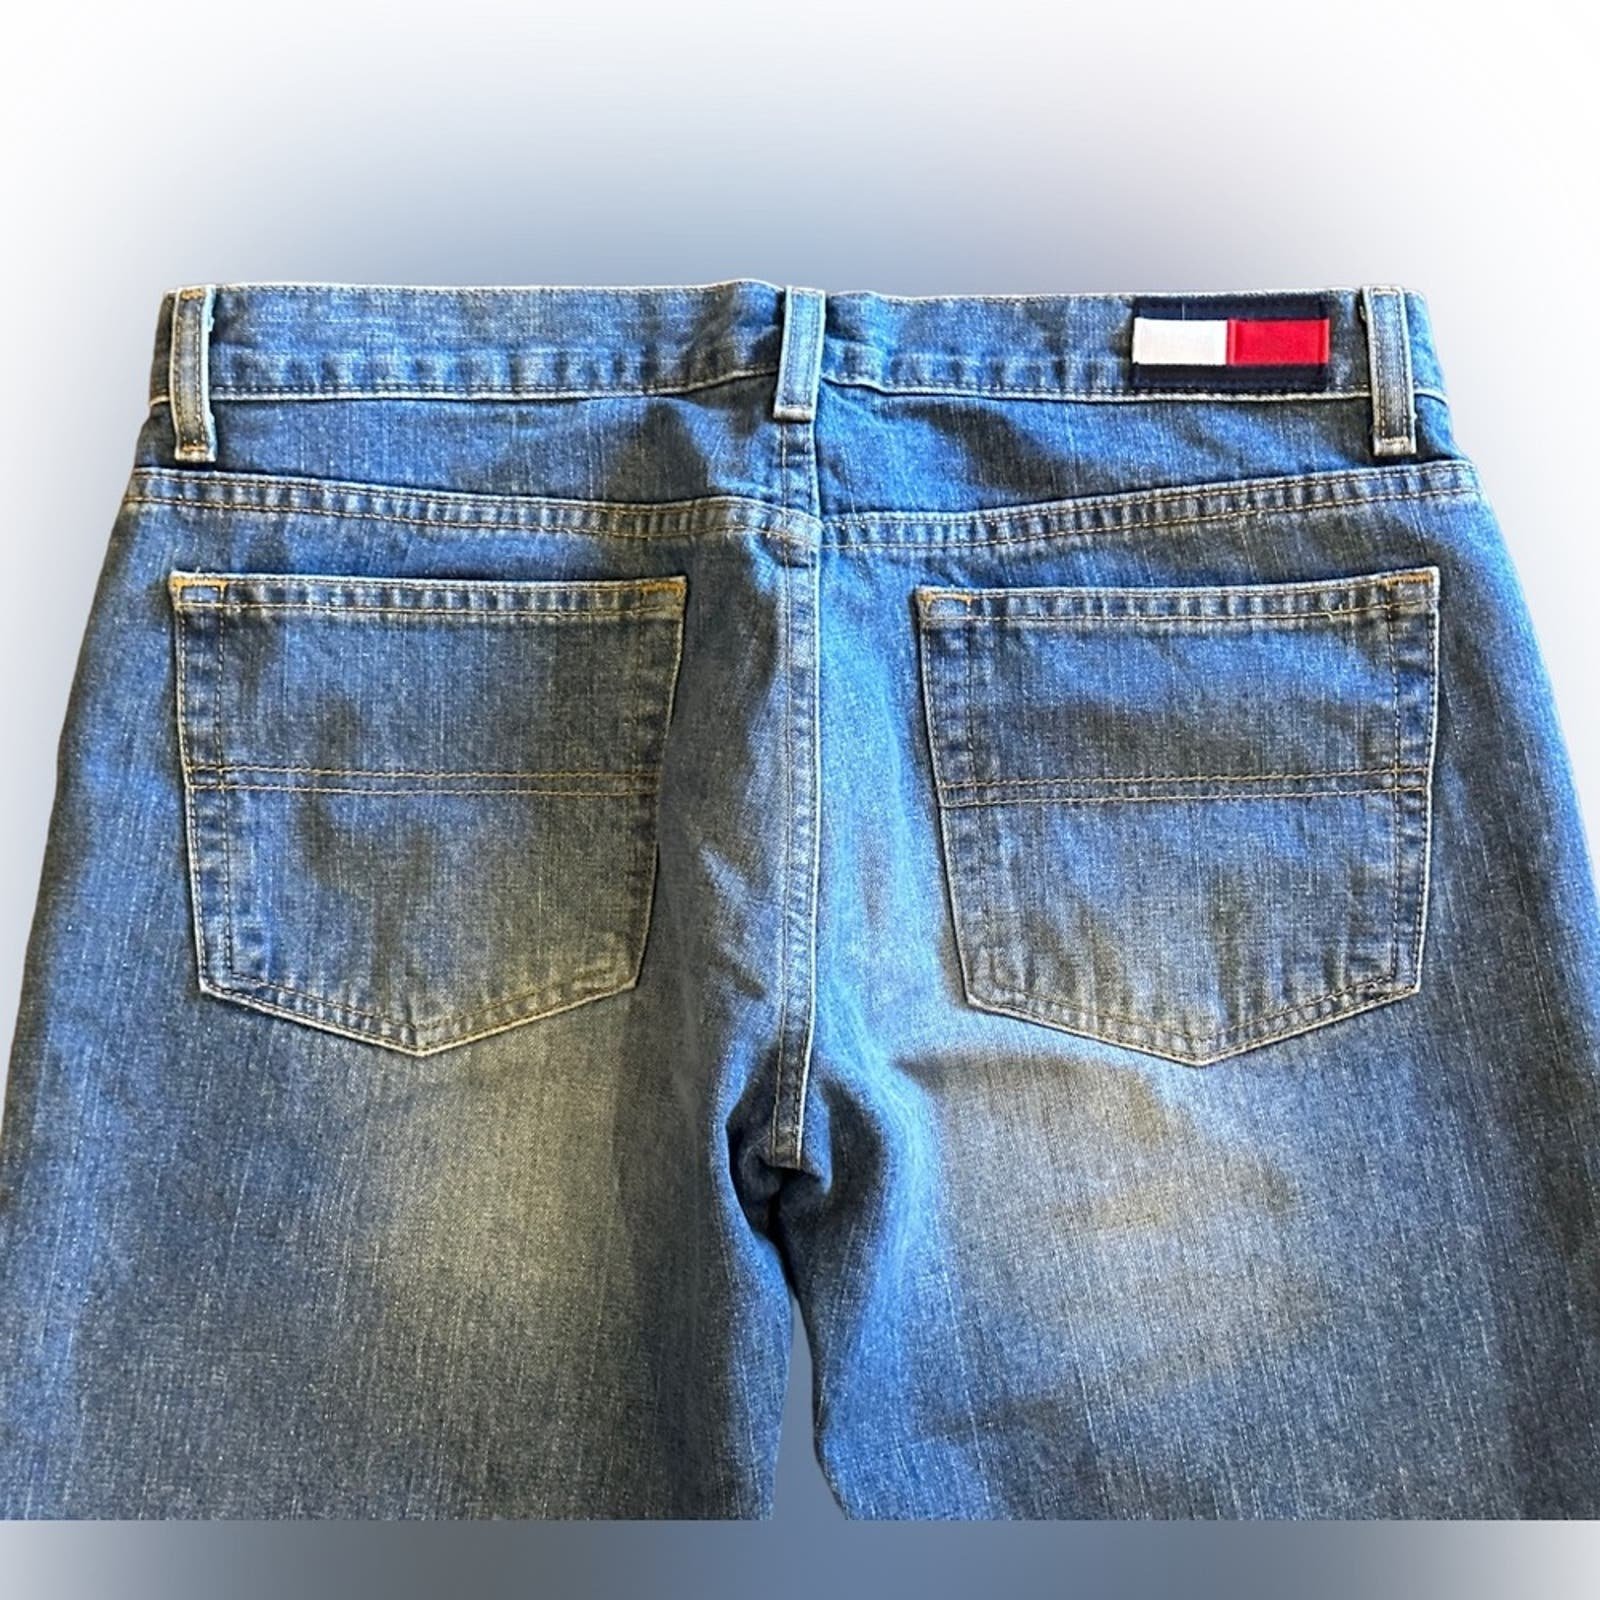 Personality Tommy Hilfiger Classic Straight Jeans 30 x 30 in 100% Cotton fqQZEhYop US Outlet